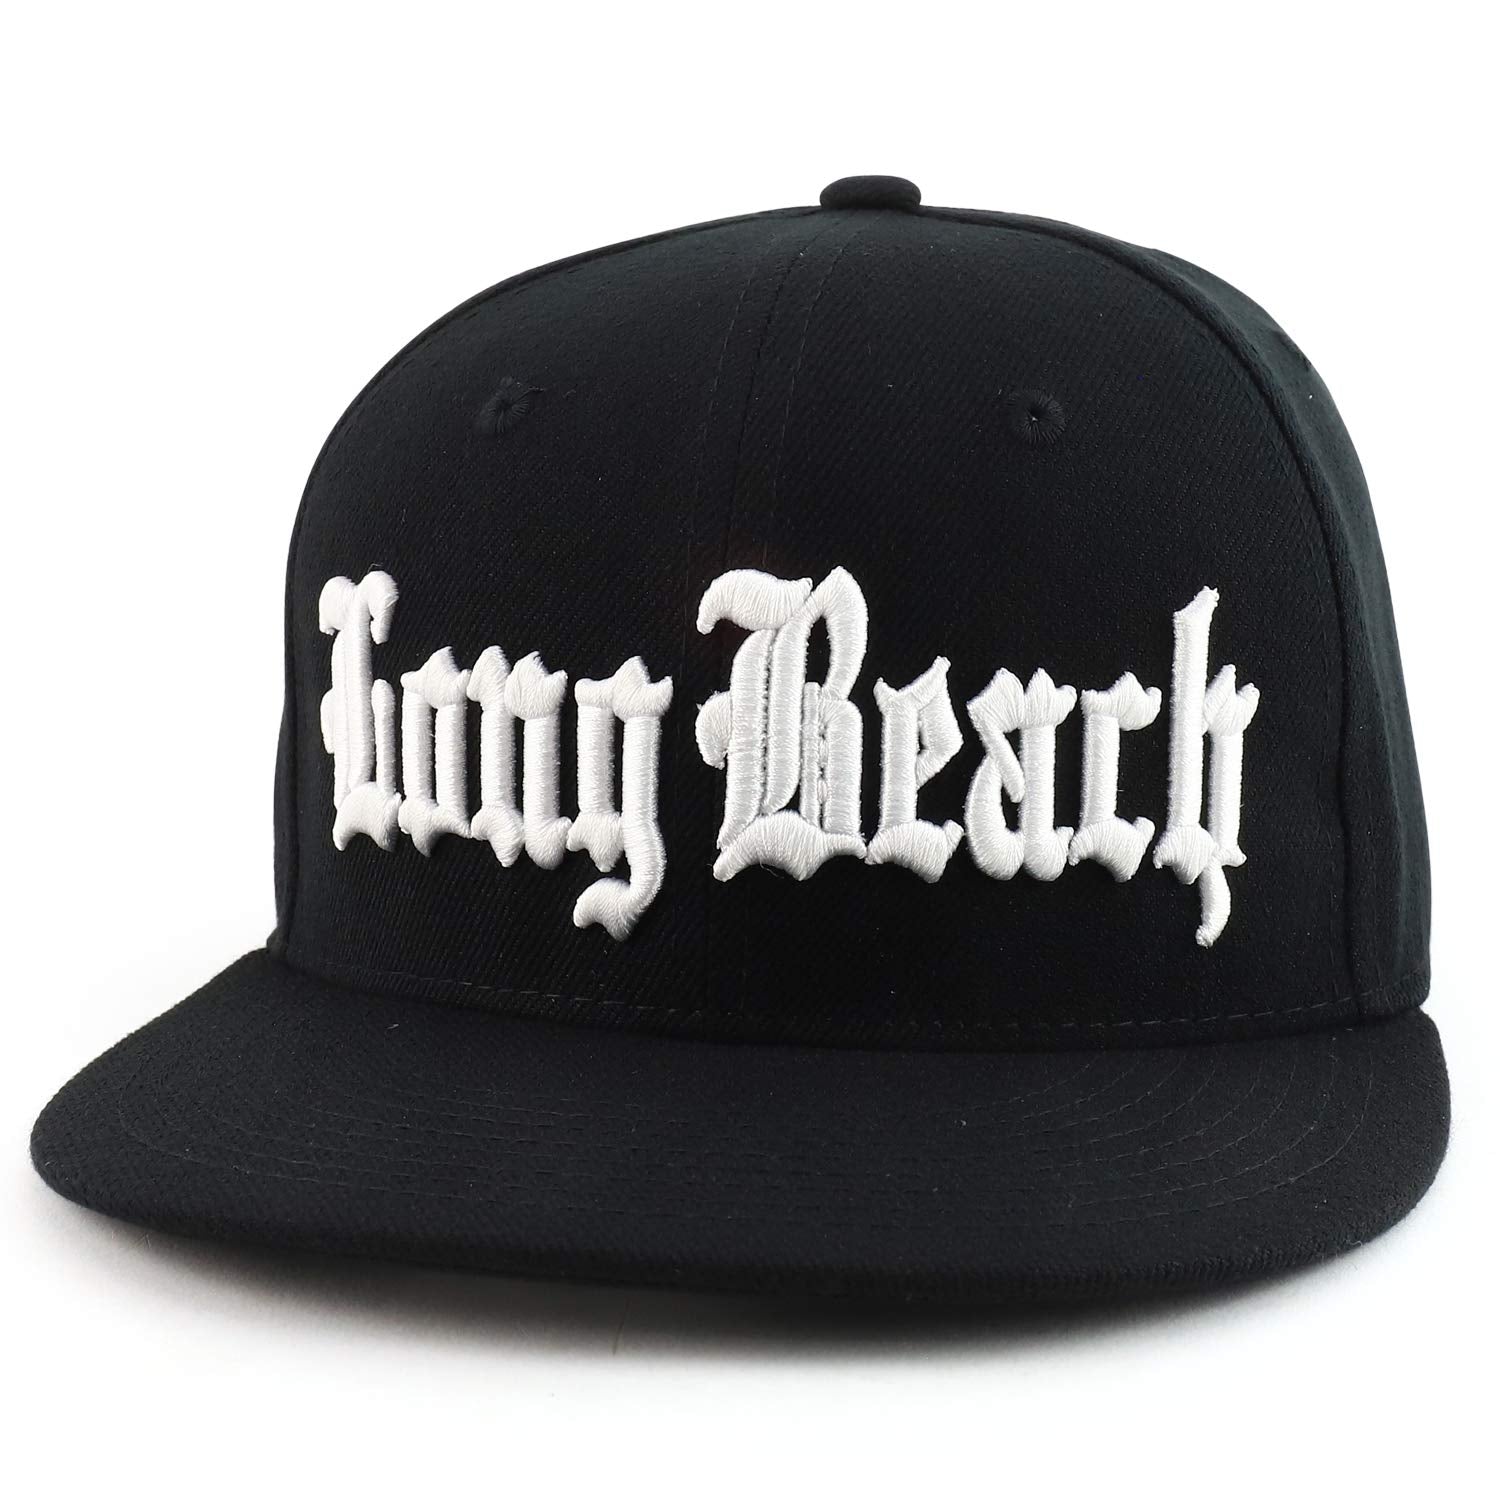 DECKY City Name Old English Embroidered Flat Bill Snapback Cap - Black - Compton